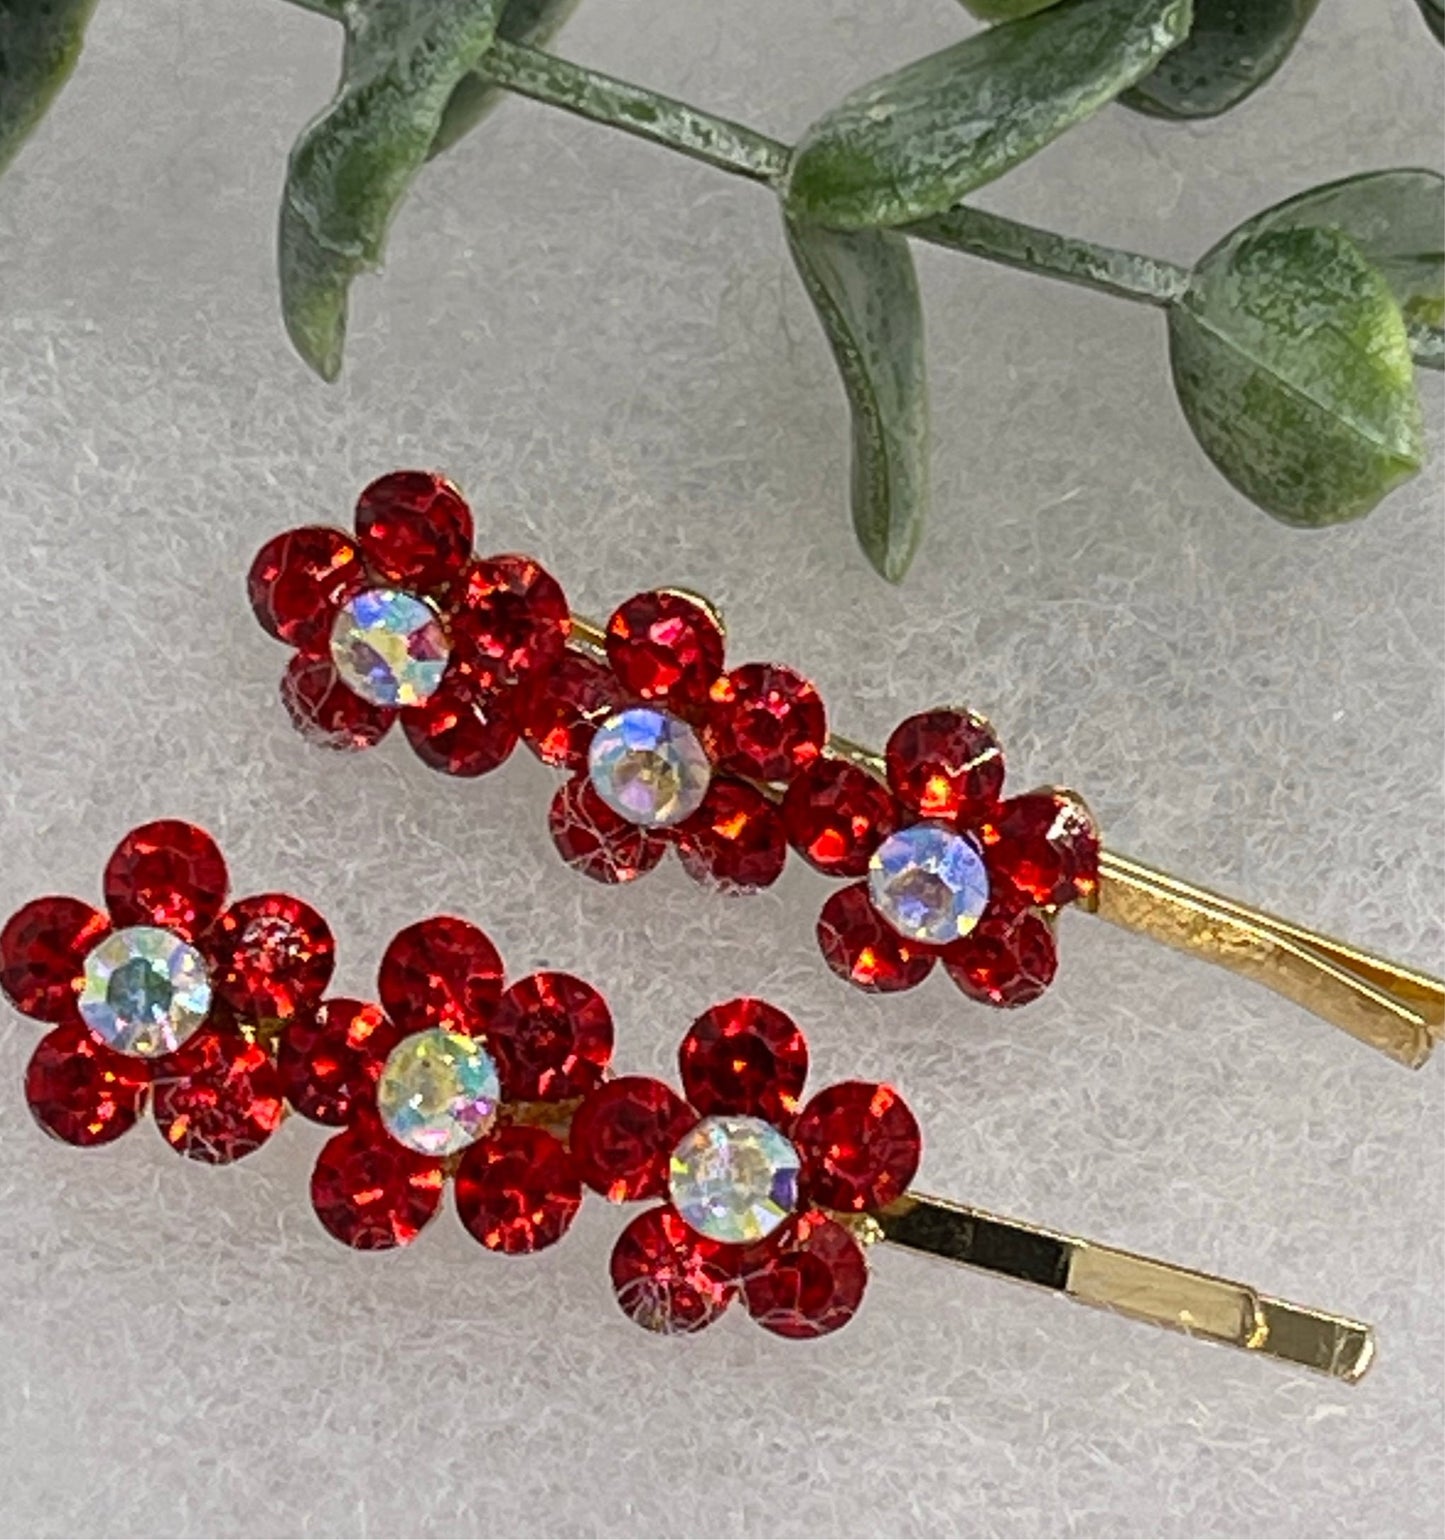 Red crystal rhinestone flowers approximately 2.0” gold tone hair pins 2 pc set wedding bridal shower engagement formal princess accessory accessories